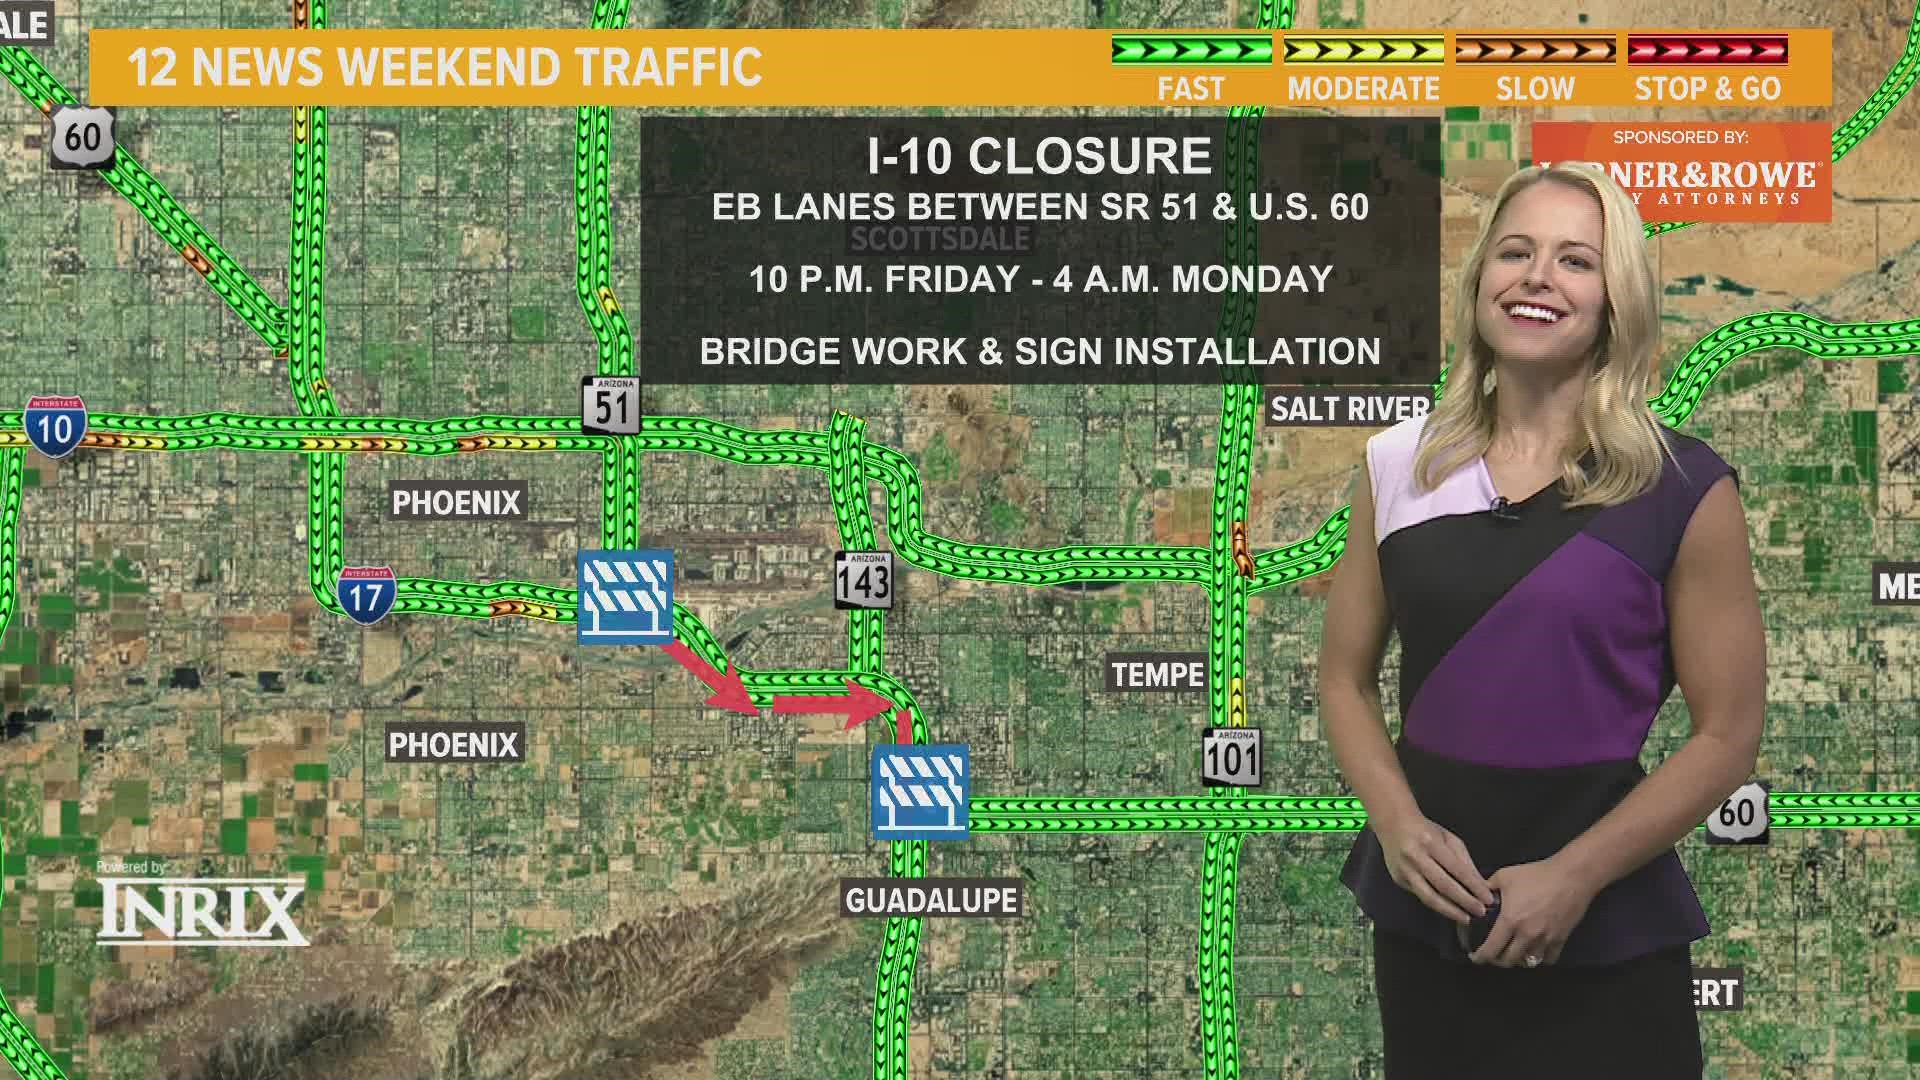 Lauren Rainson has a breakdown of the current closures and detours drivers will find on Valley roads this weekend.